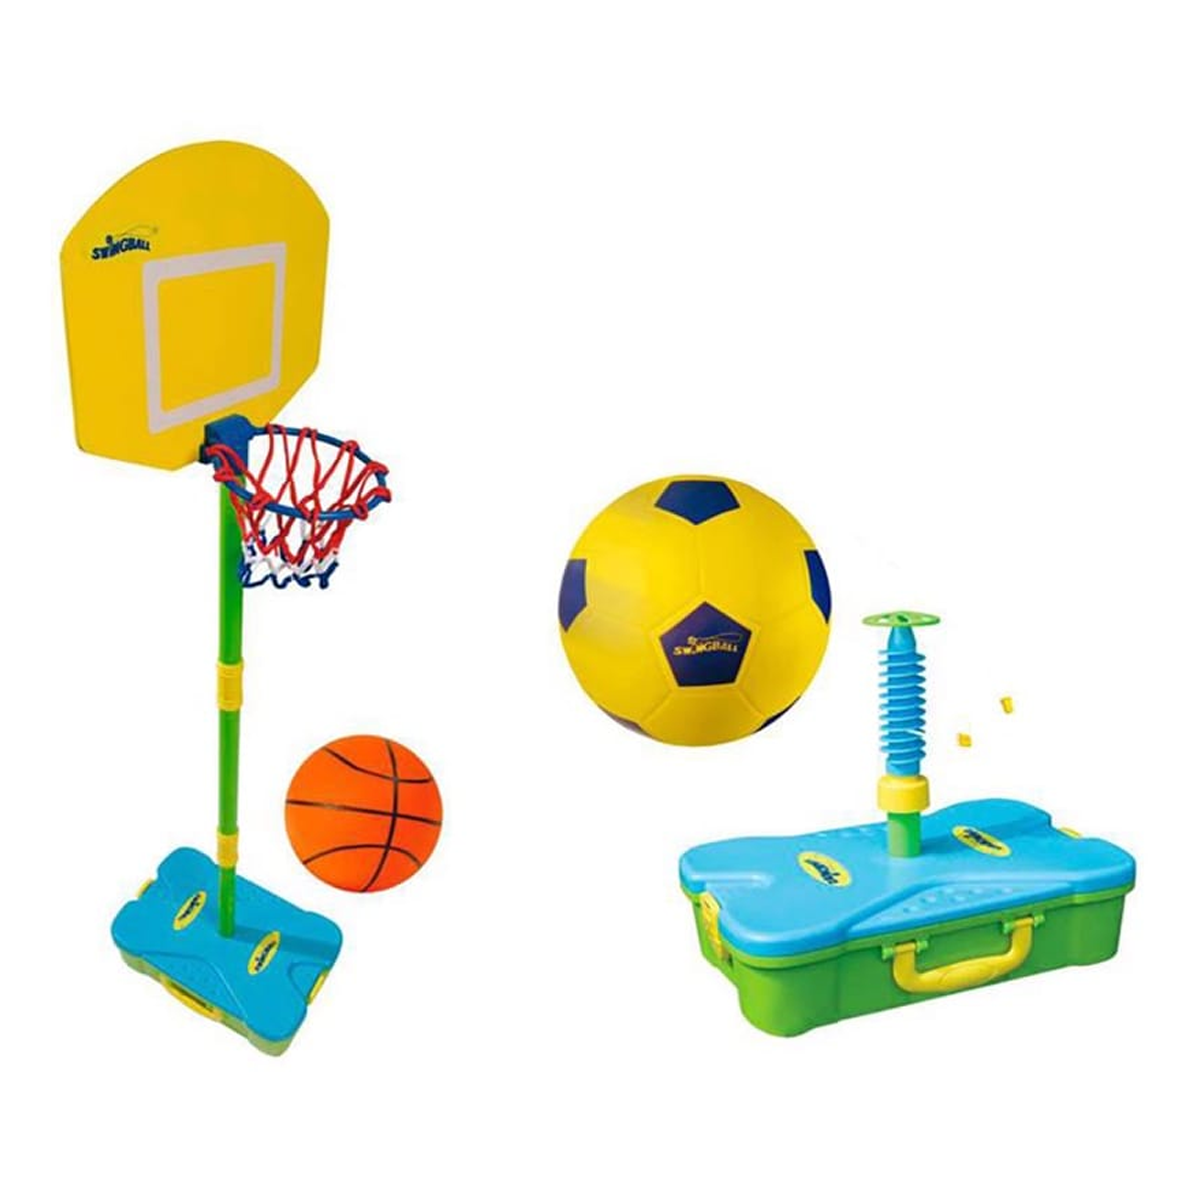 Mookie All Surface 3-in-1 First Swingball